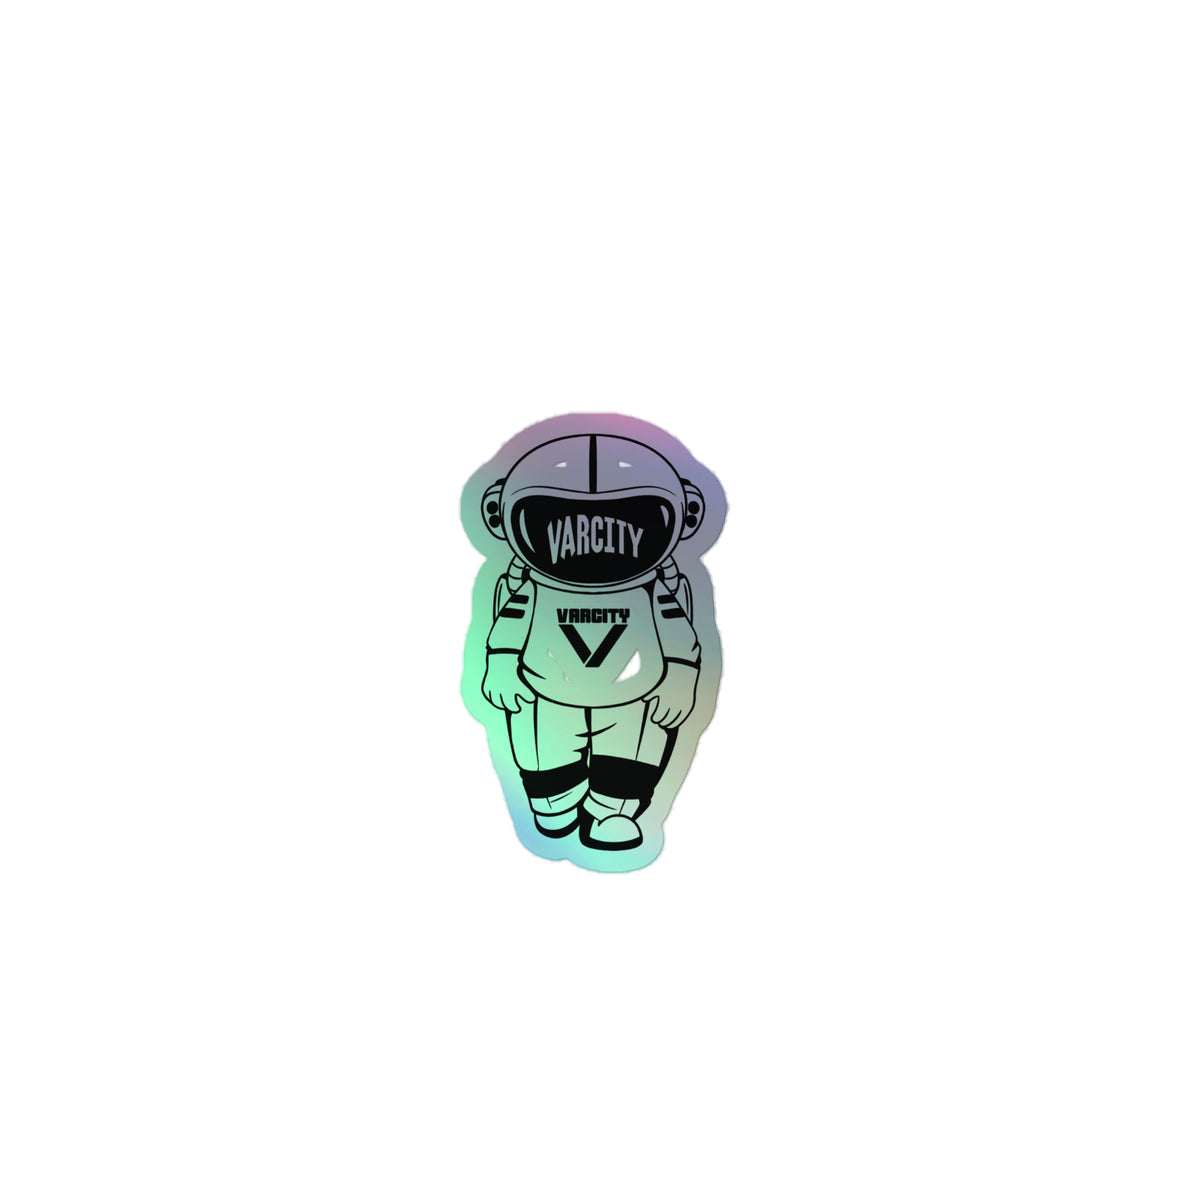 Varcity Unlimited Astro Boy Holographic sticker